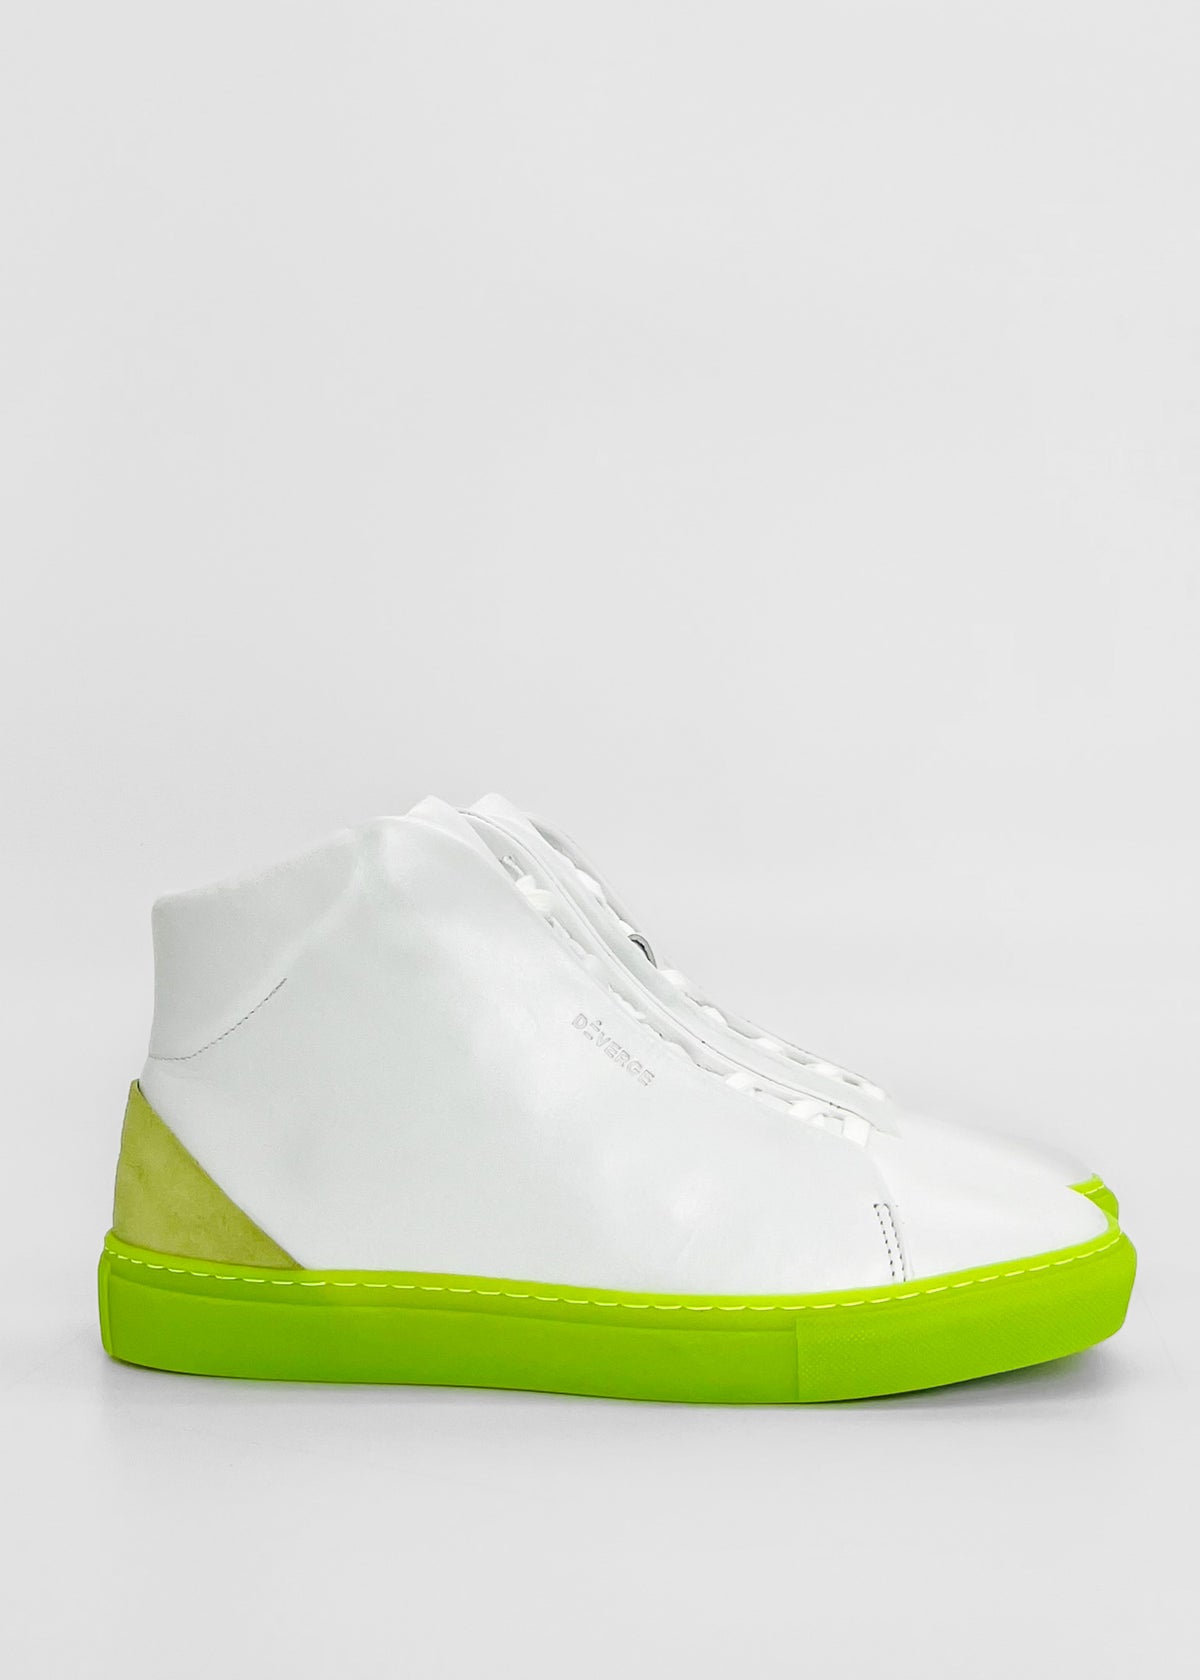 MH0100 White Leather / Lime high-top sneakers featuring bright green soles and heel accents, crafted from premium Italian leathers. Ethically made to order and handcrafted in Portugal, set against a plain white background.